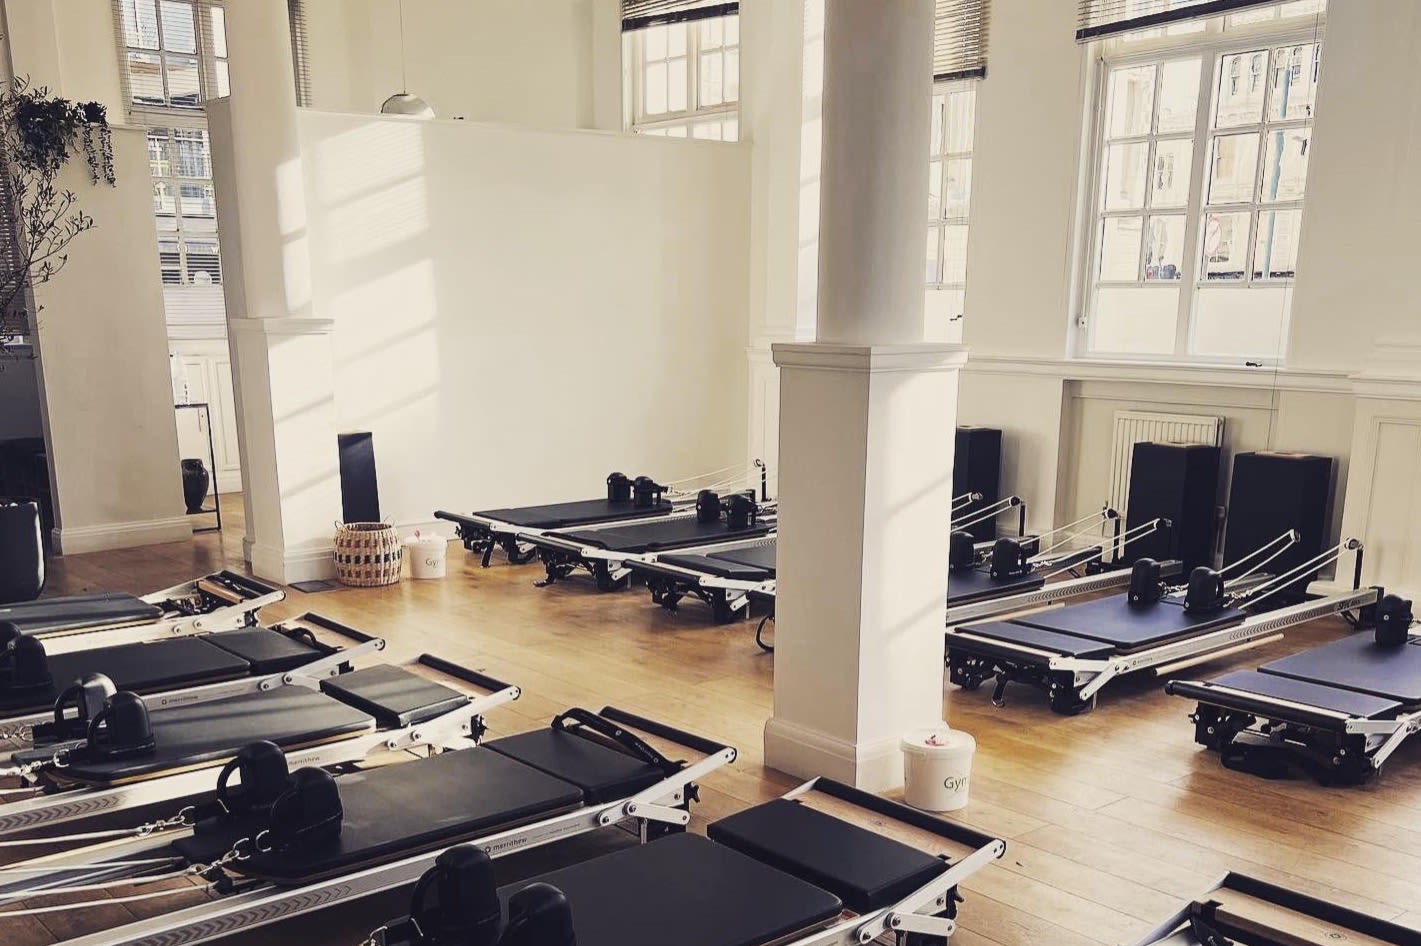 NY Pilates Studio London: Read Reviews and Book Classes on ClassPass